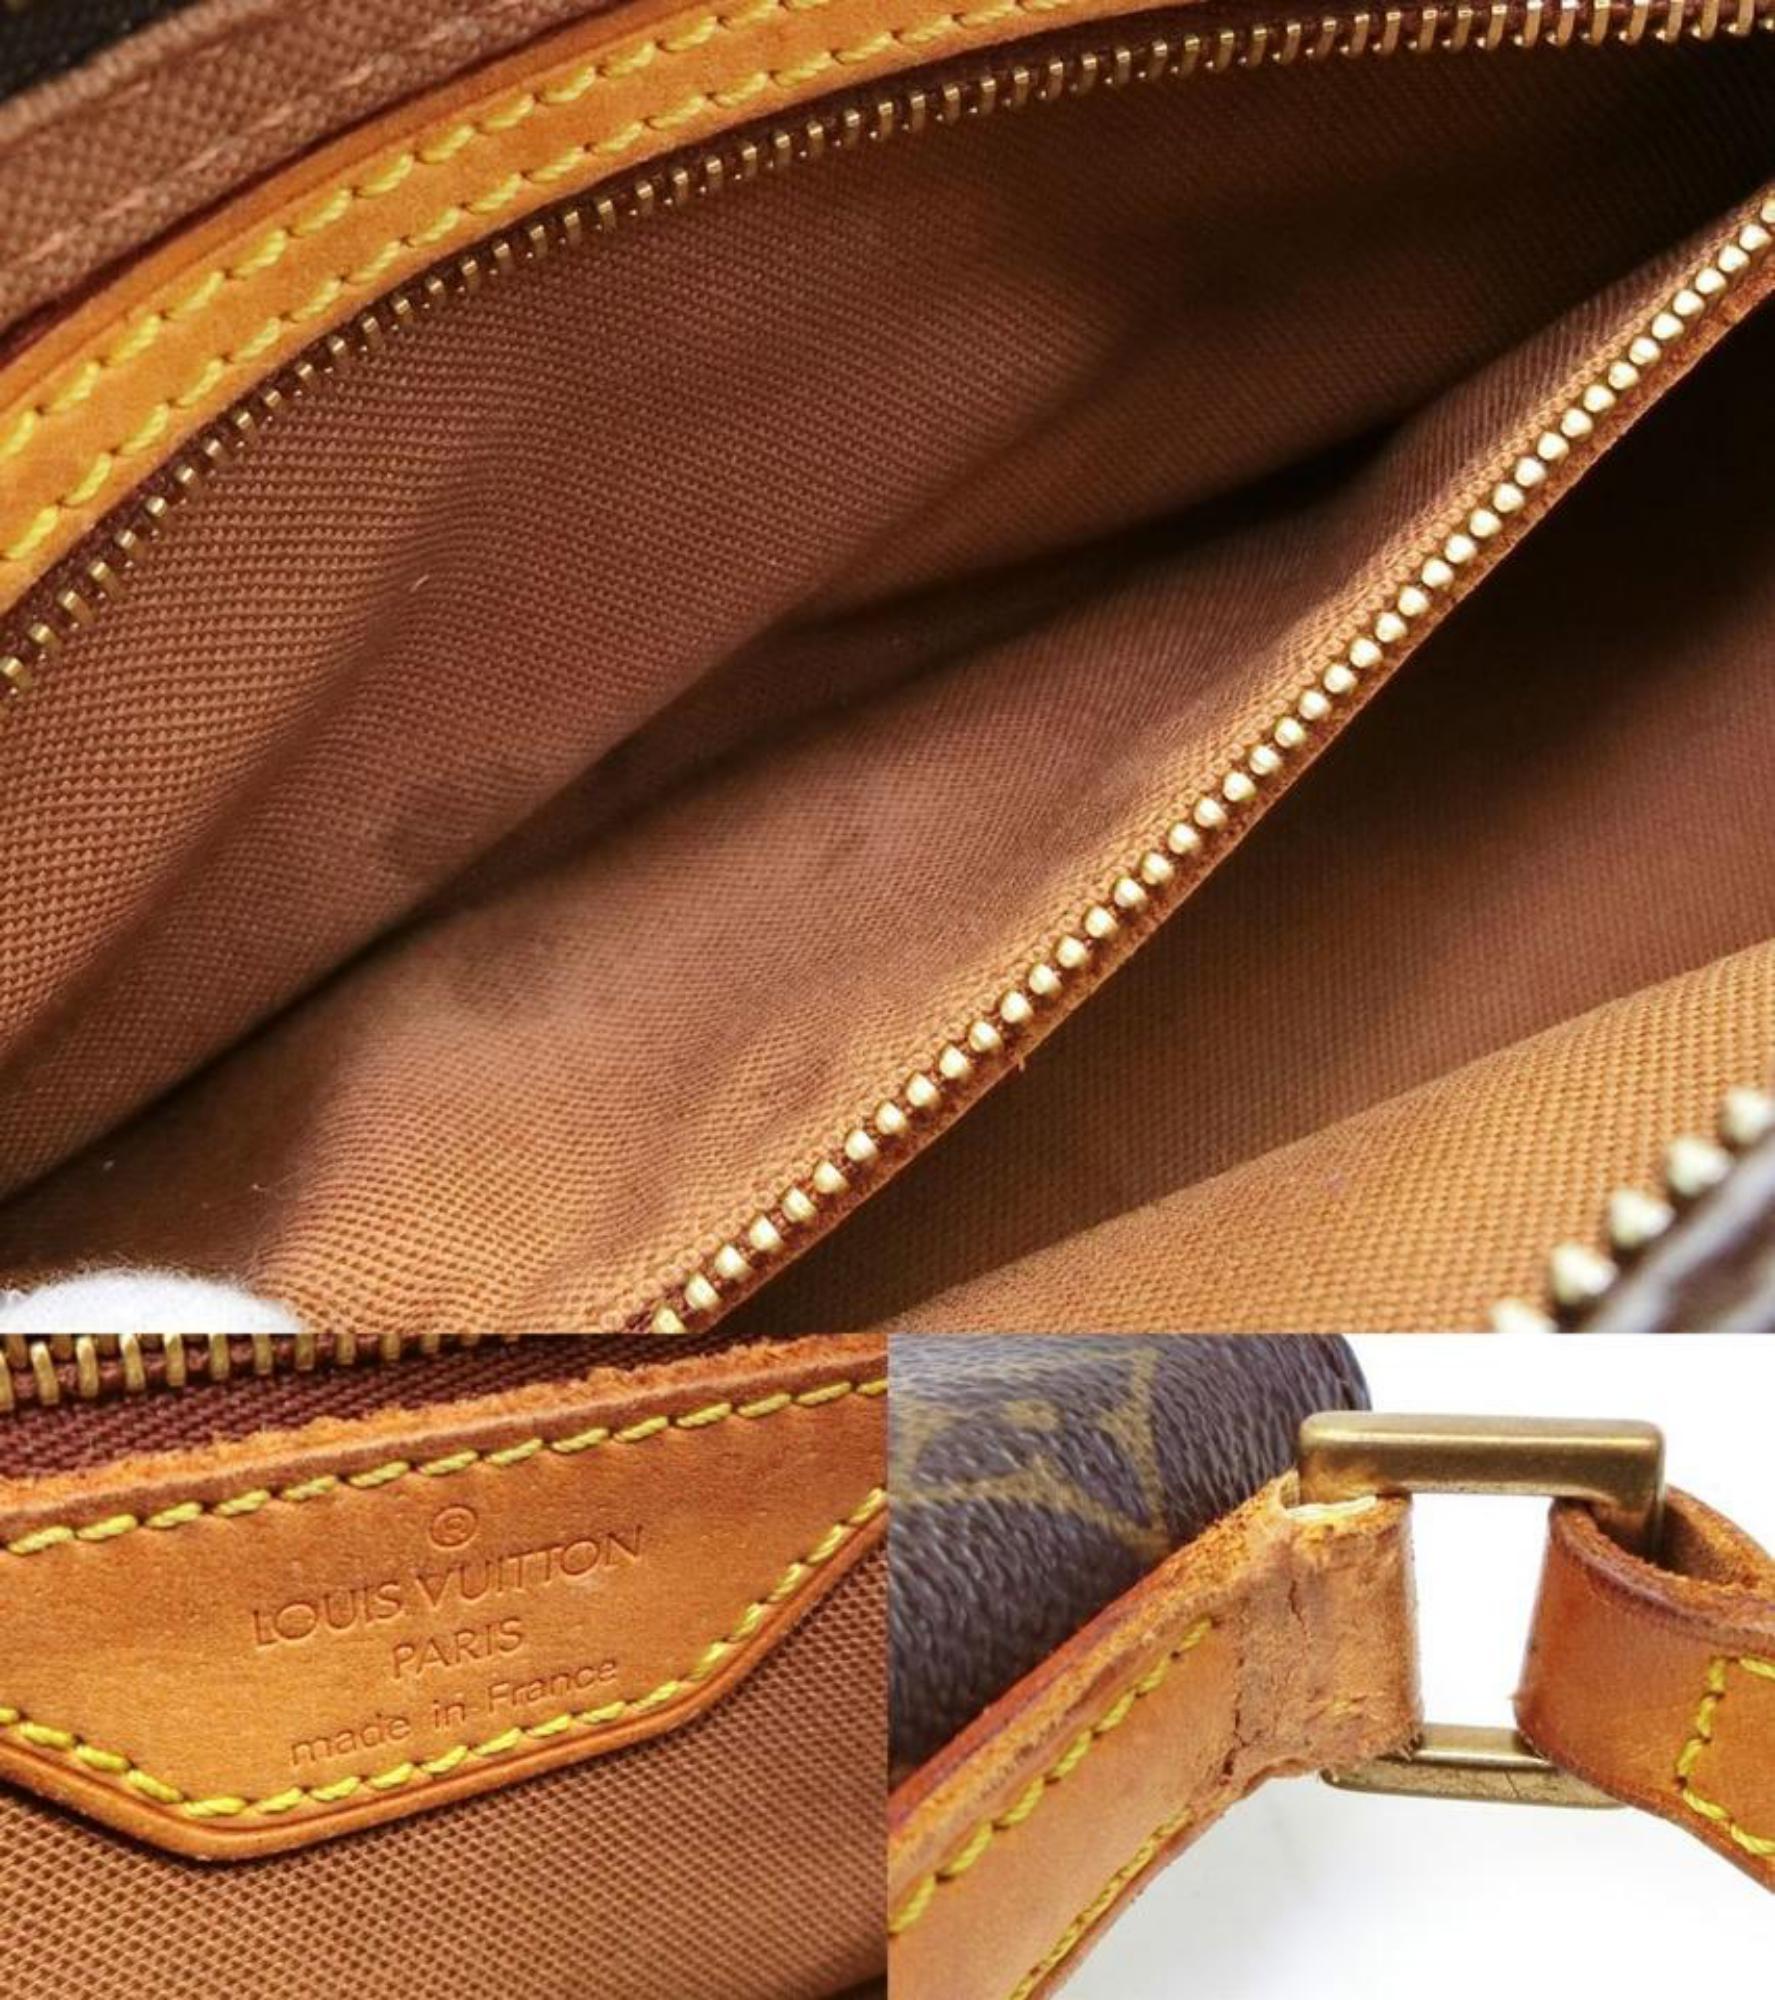 Date Code/Serial Number: AR0073
Made In: France
Measurements: 
Length: 10.25
Width: 3
Height: 5
Shoulder strap drop: 19.5
OVERALL GOOD CONDITION
( 7/10 or B ) 
Signs of Wear:
Exterior: Canvas is in mint condition Bottom of the bag has some staining